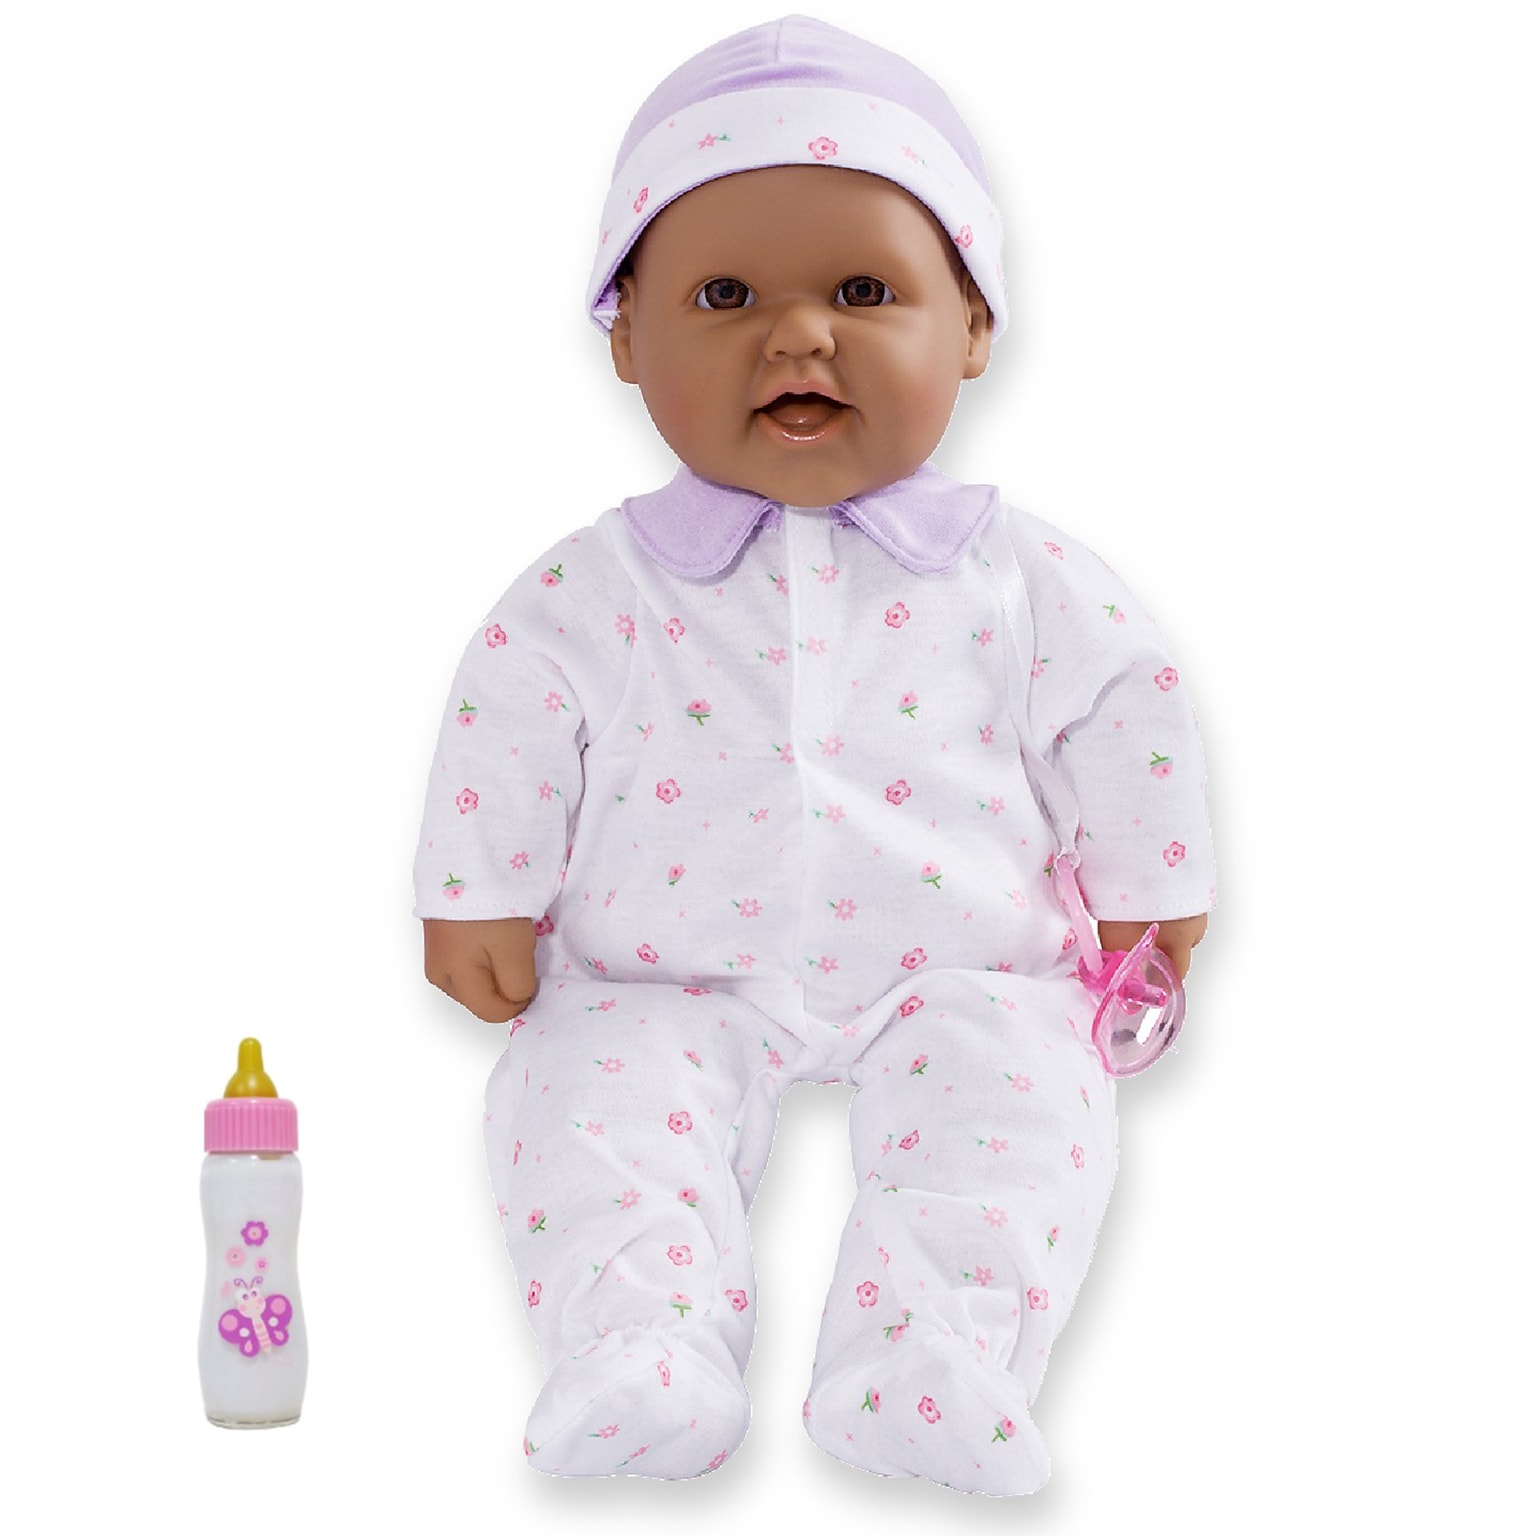 JC Toys La Baby 16 Hispanic Baby Doll with Pacifier (BER15033)